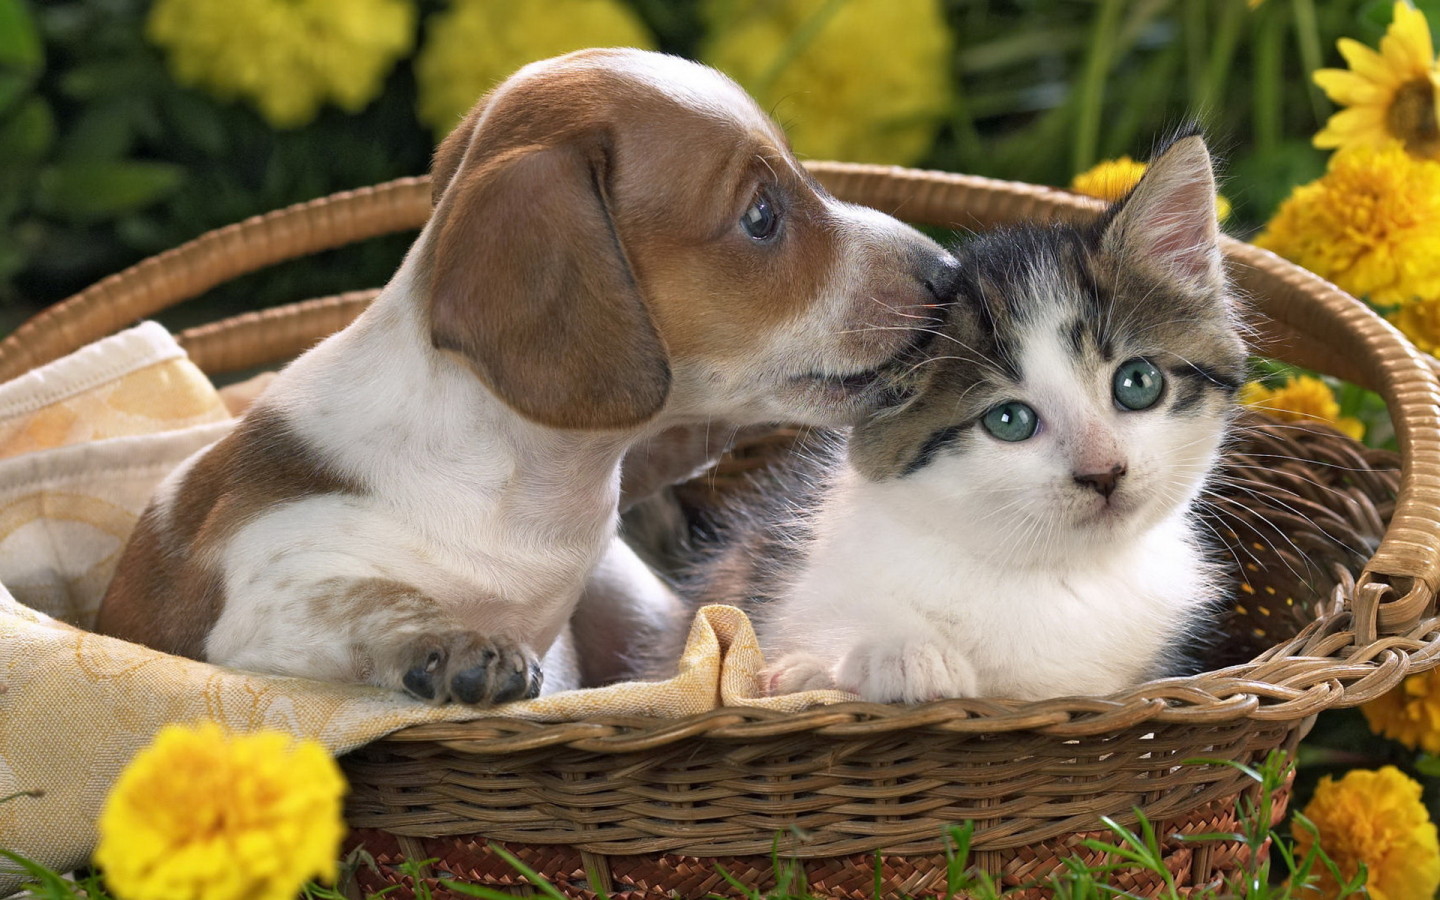 Cute kittens and puppies together wallpaper | danasrfc.top